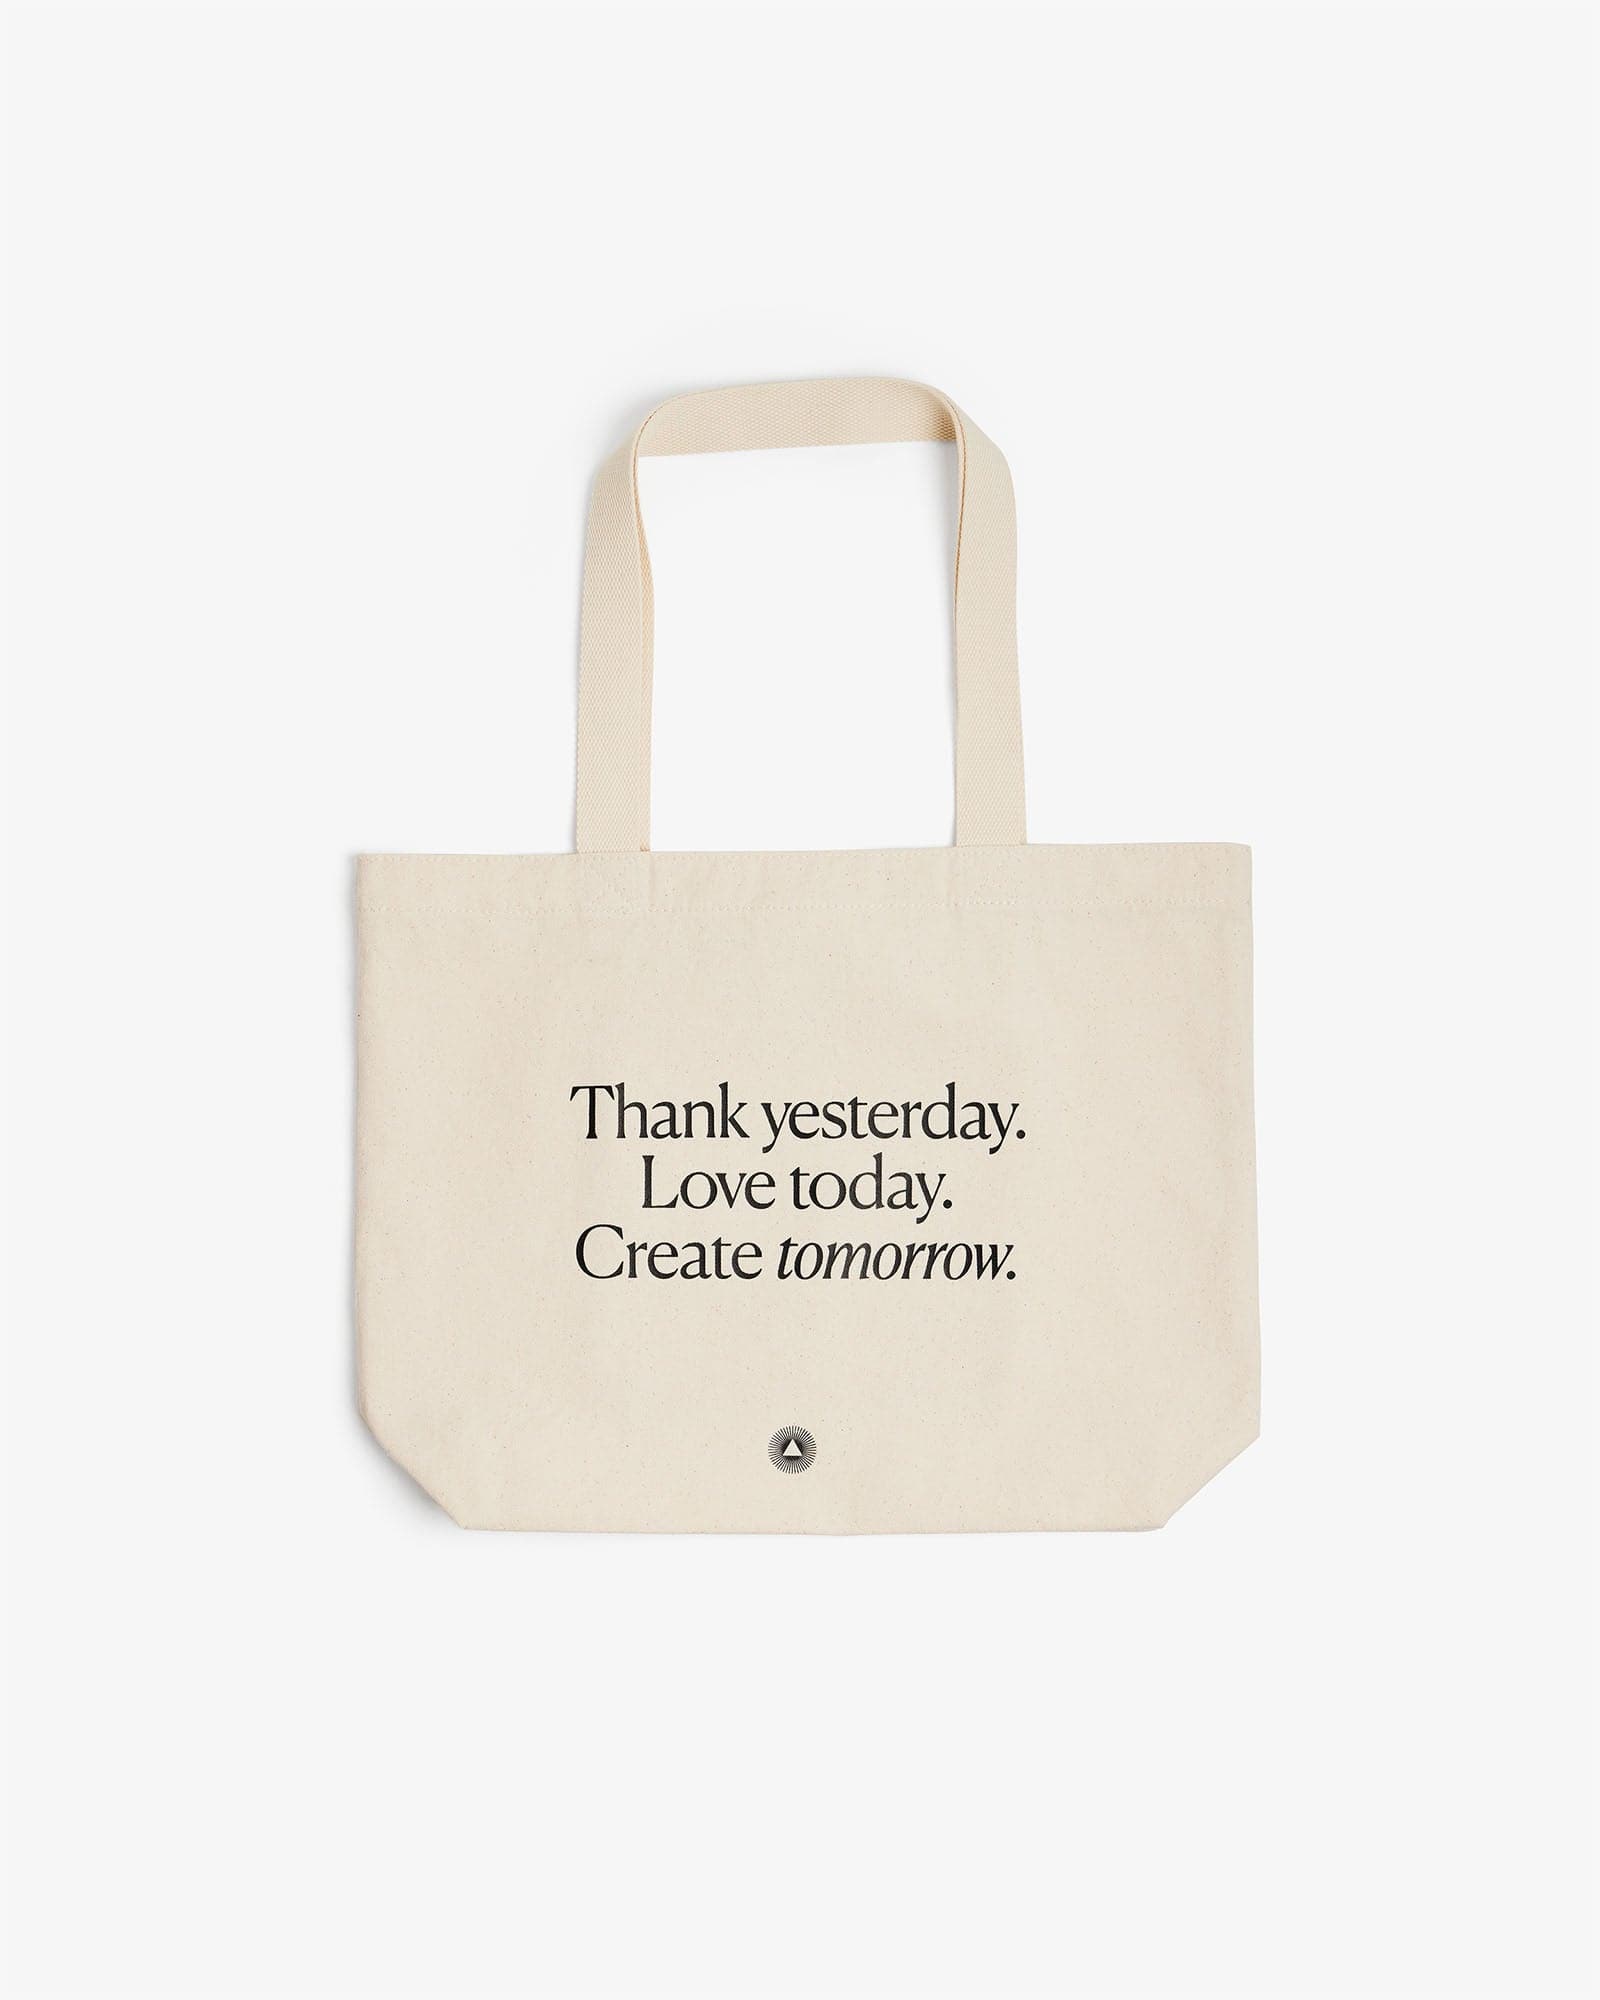 Tropics Daily Grind - Cute Tote Bags - Talking Out of Turn